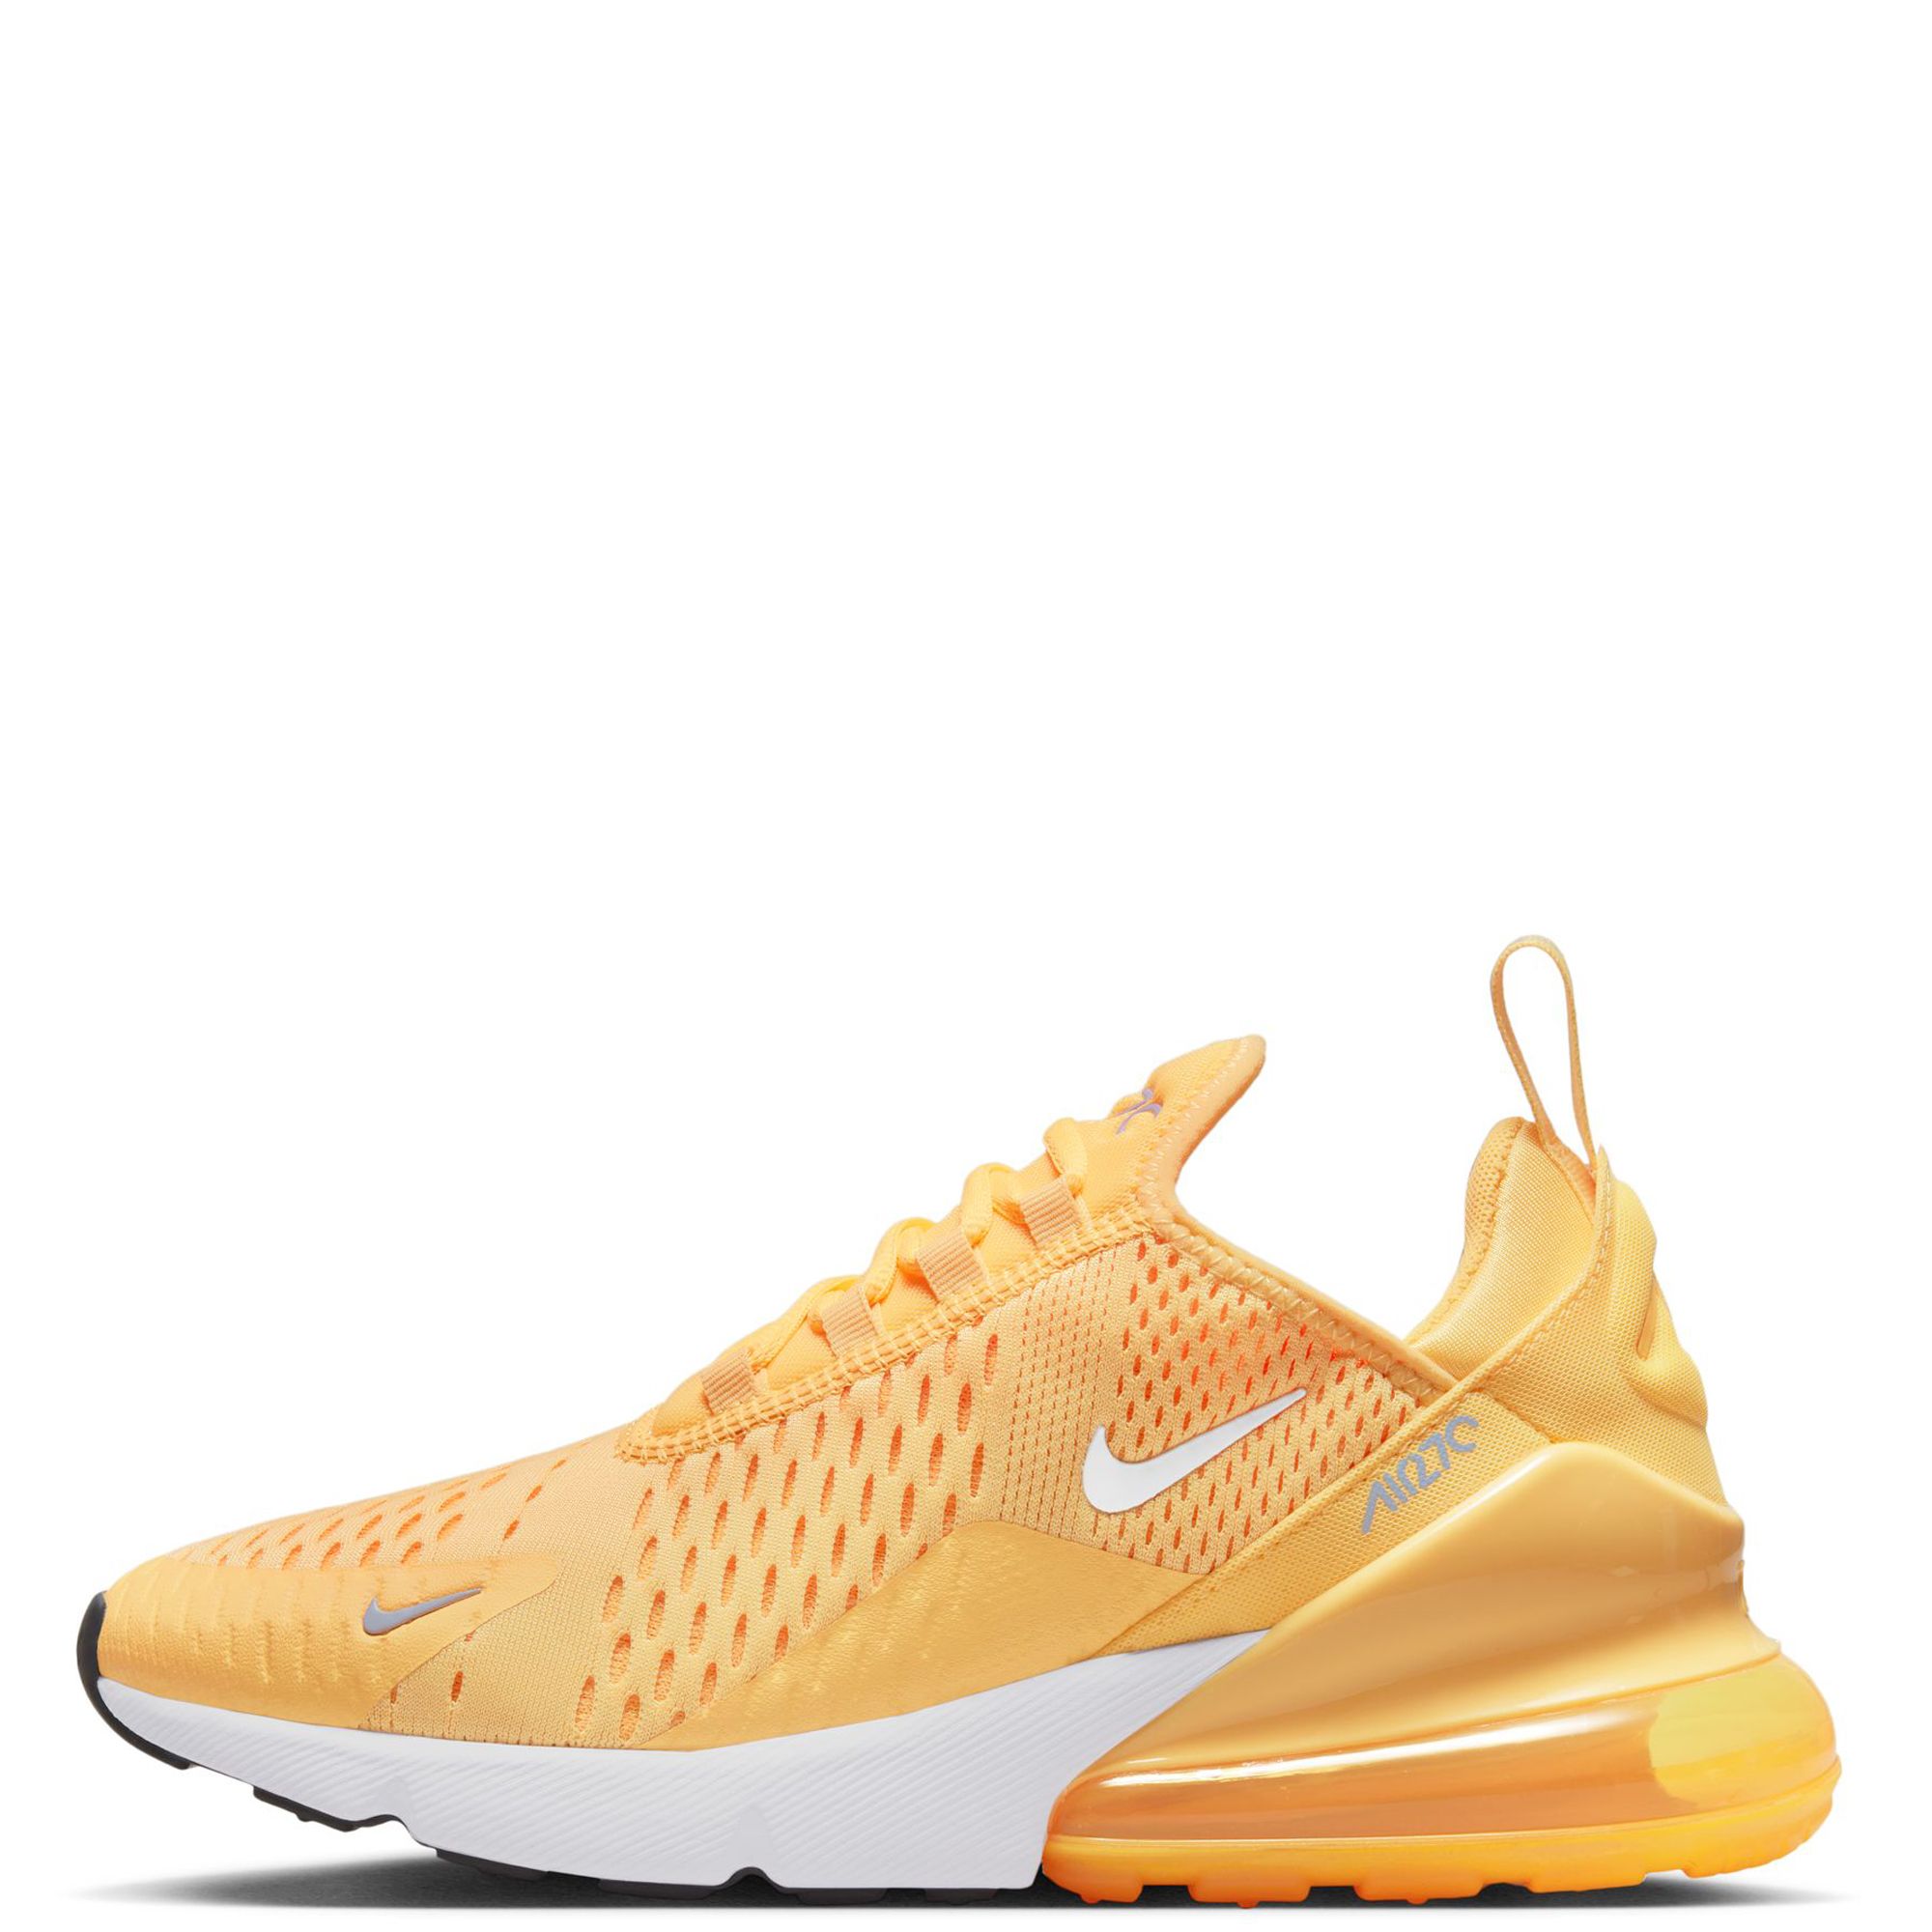 Nike Women's Air Max 270 Shoes in White, Size: 5.5 | AH6789-110